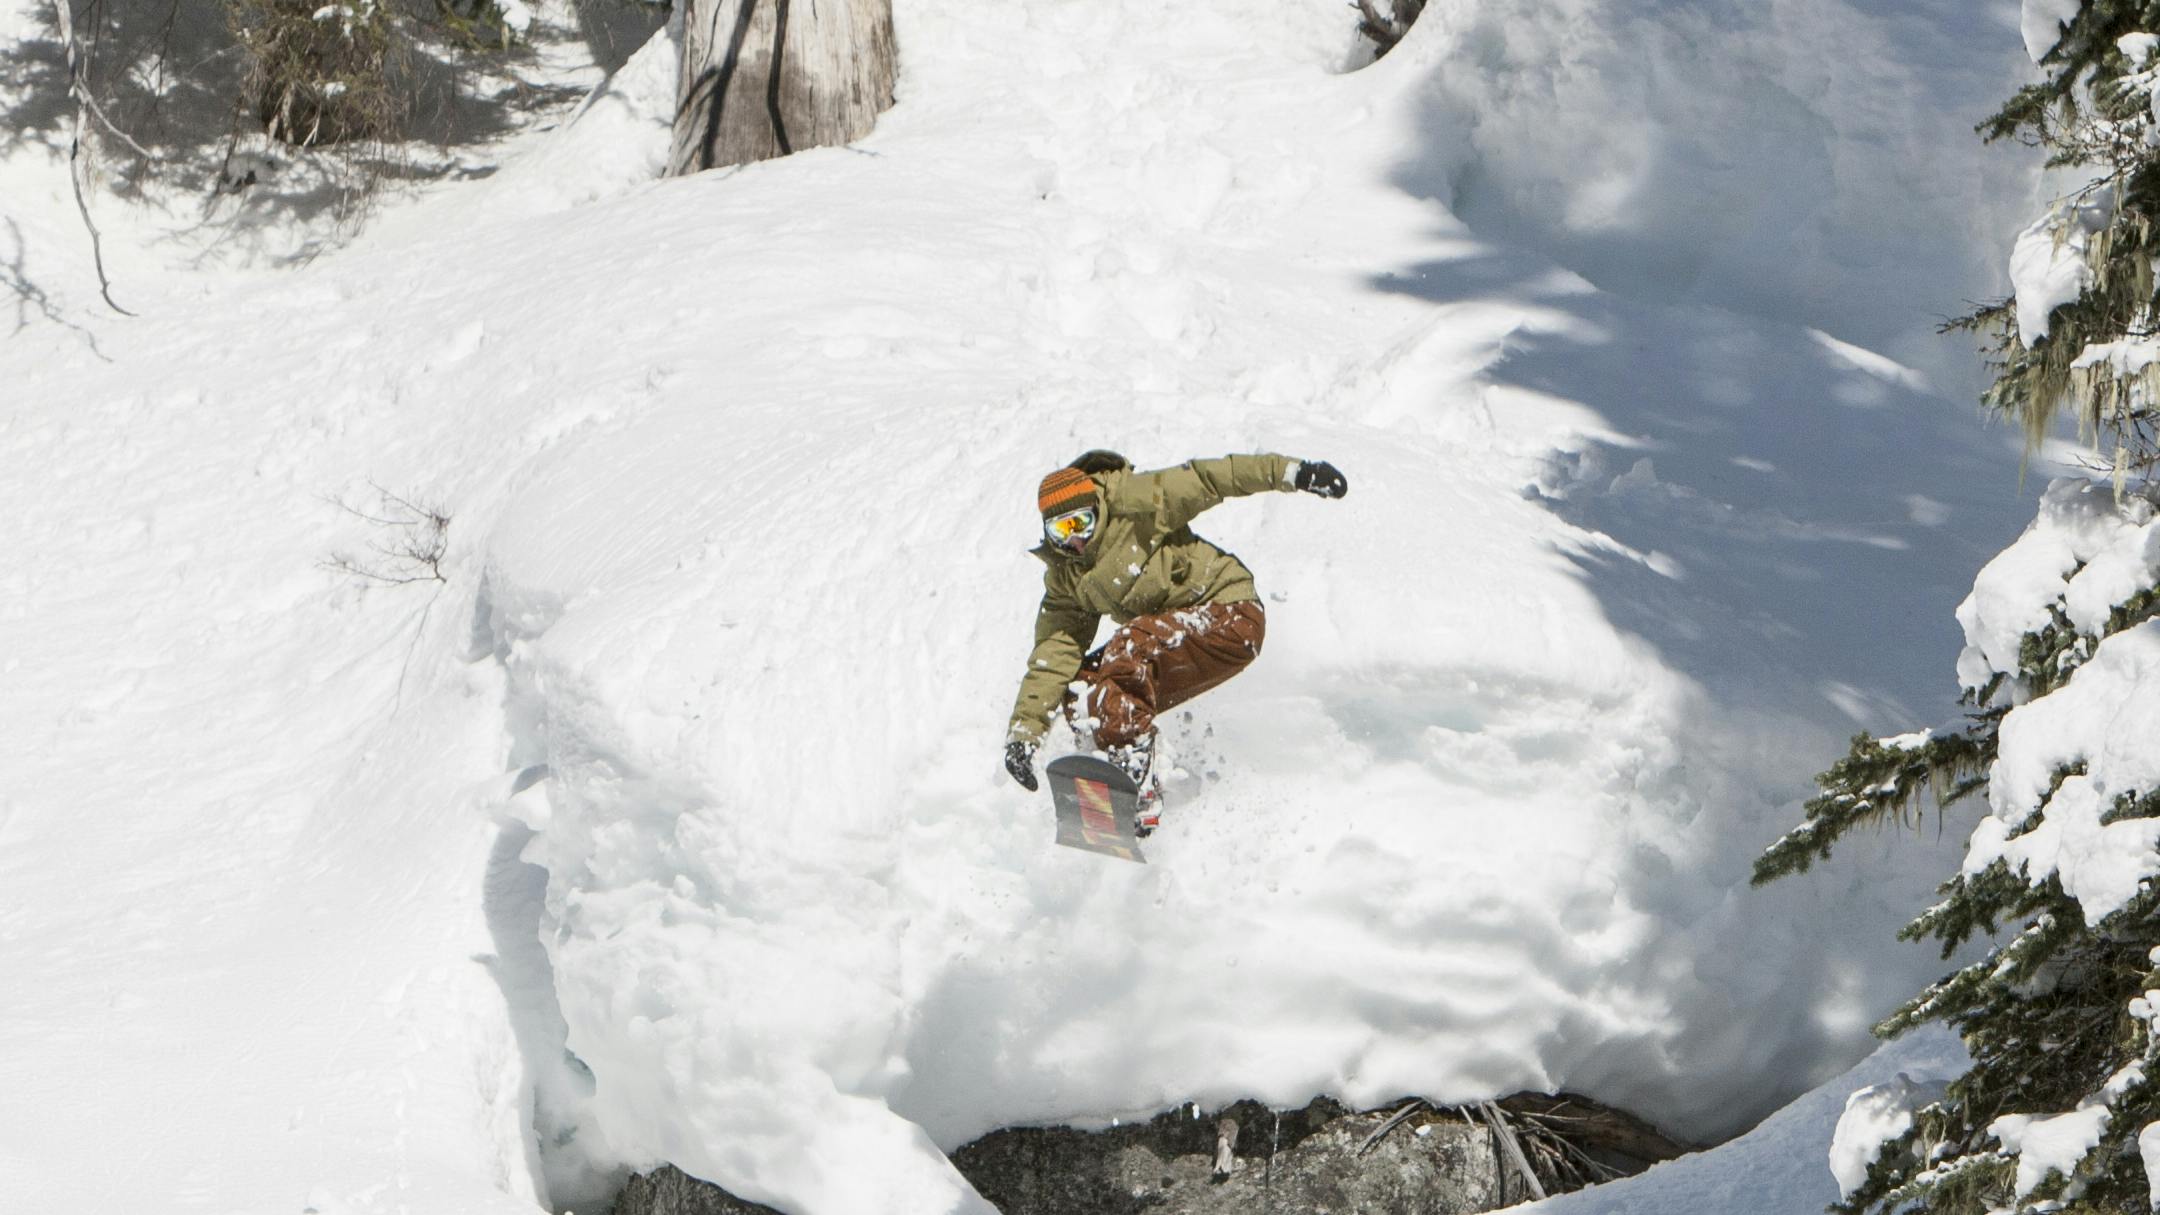 A snowboarder snowboards off a jump in a densely wooded area.